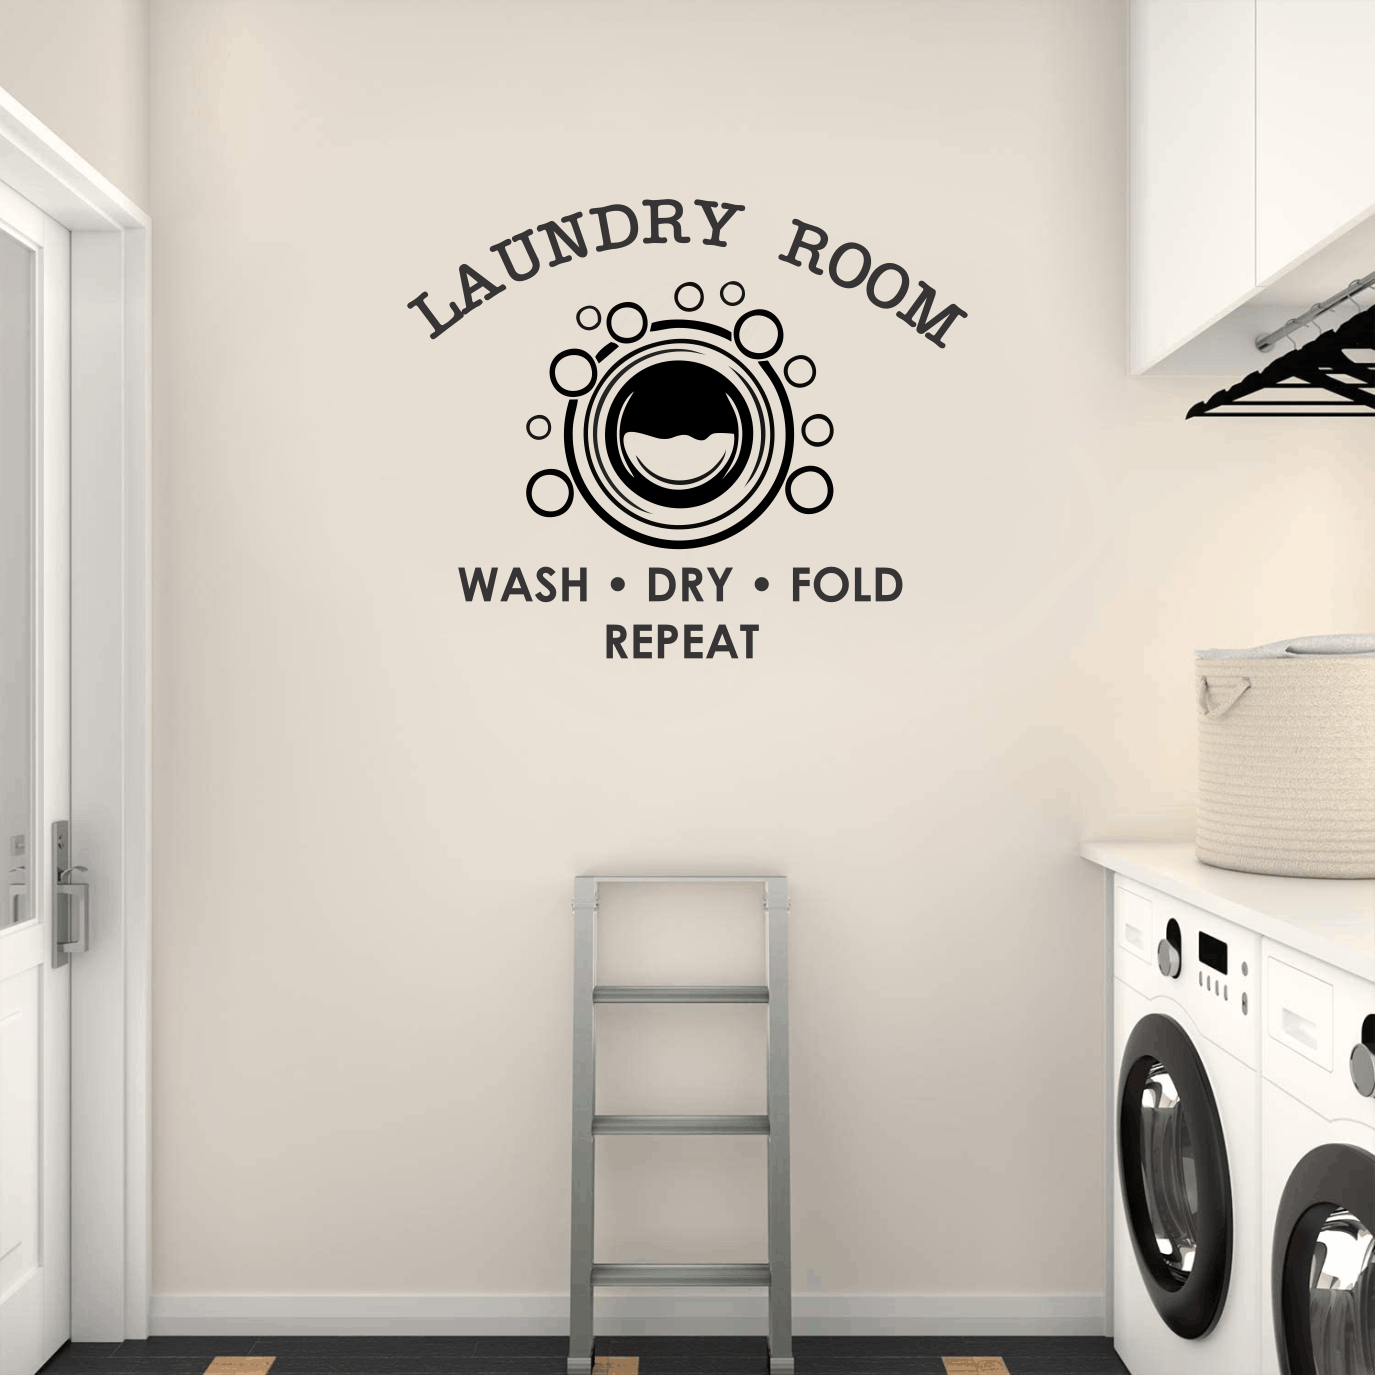 LAUNDRY ROOM - WASH DRY FOLD REPEAT